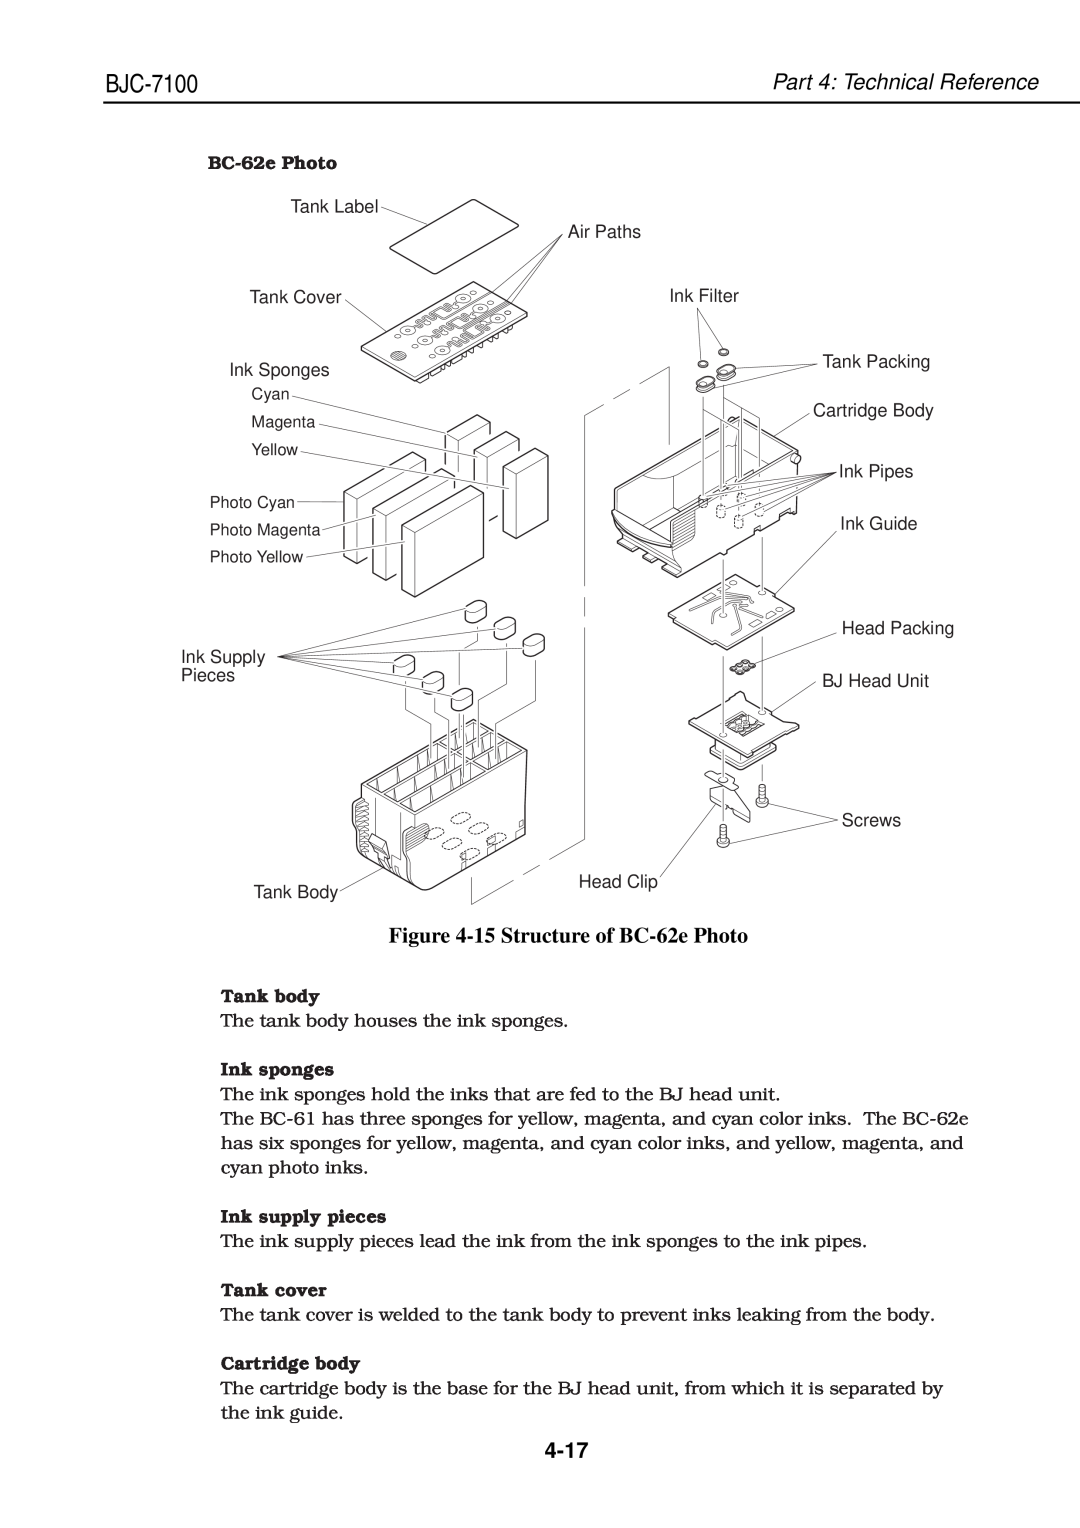 Canon QY8-1360-000 manual 15 Structure of BC-62e Photo, 4-17, BJC-7100, Part 4 Technical Reference, Tank body, Ink sponges 